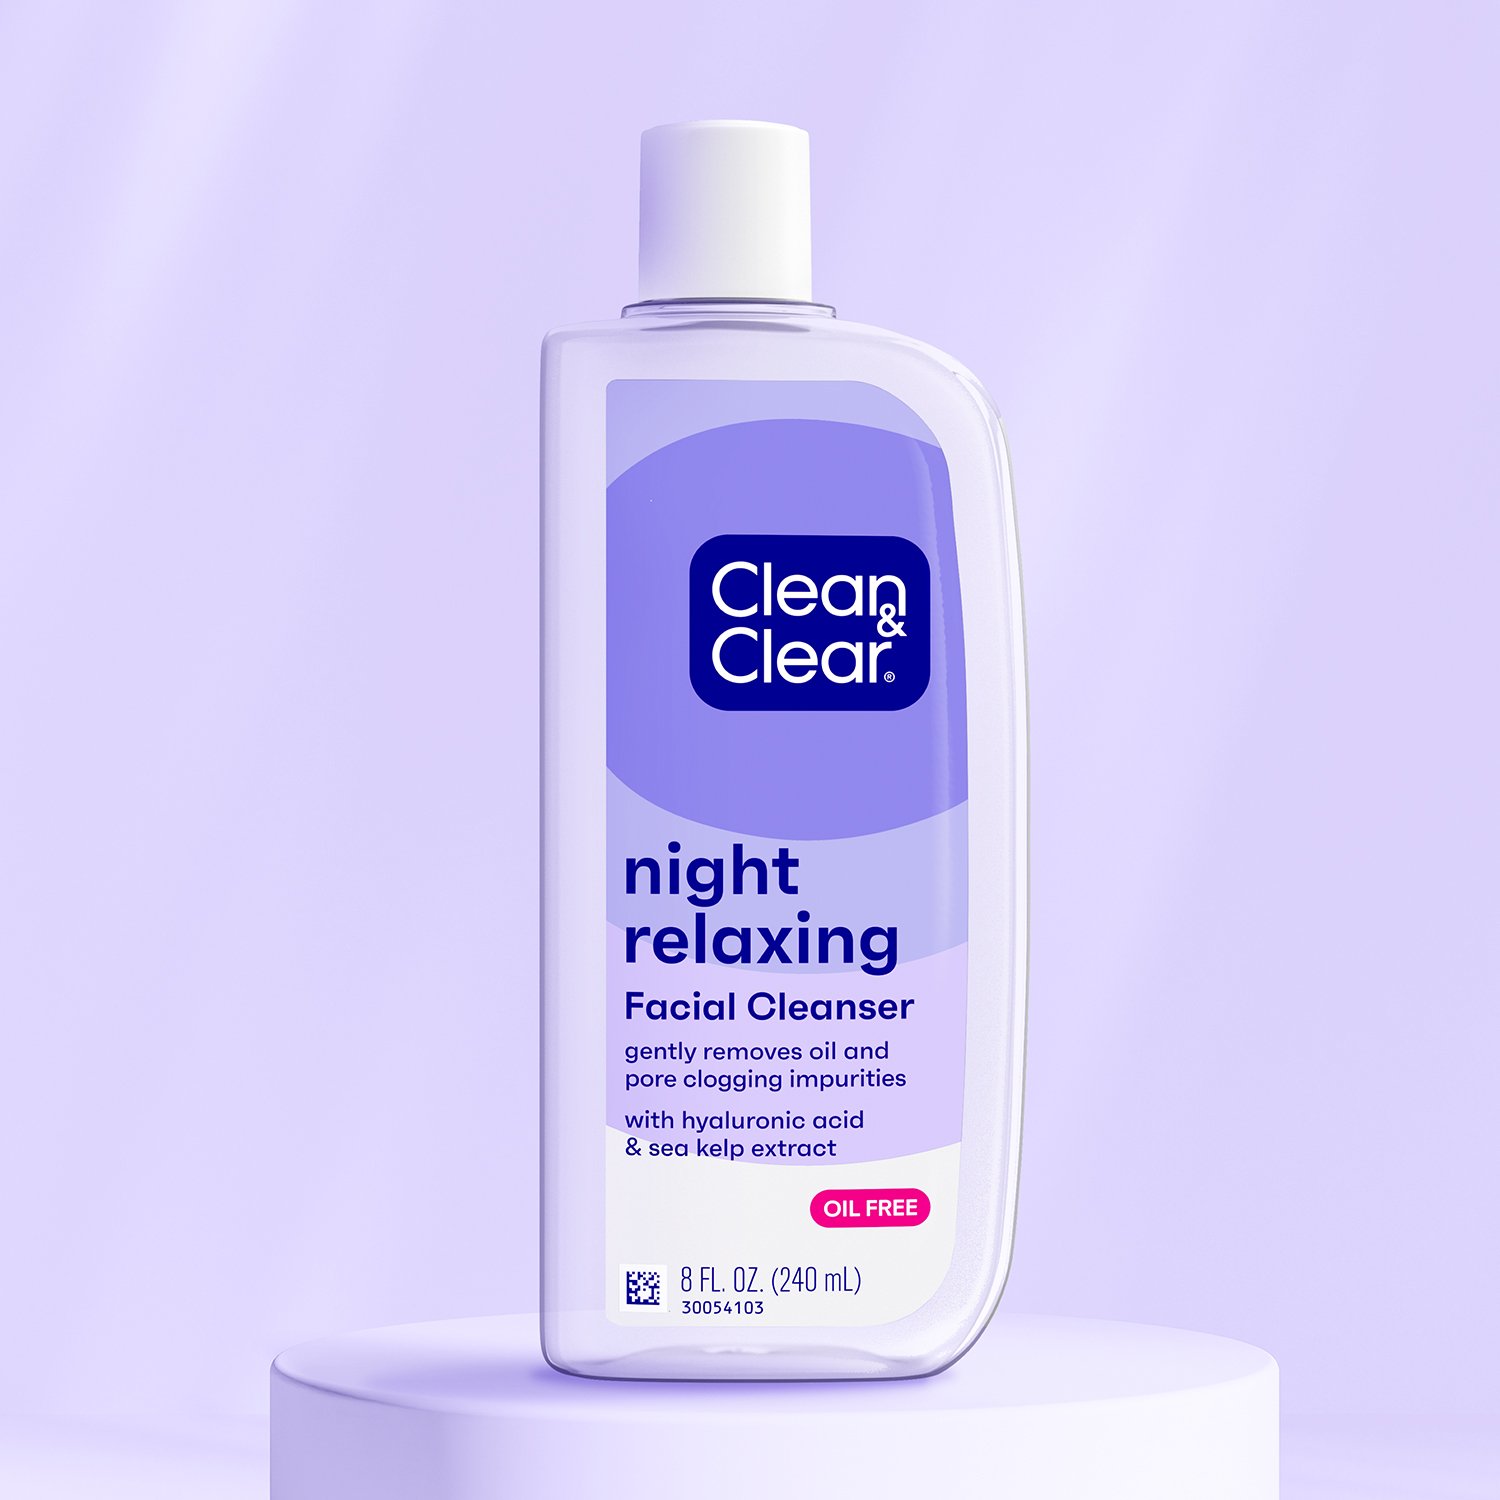 https://www.cleanandclear.com/sites/cleanandclear_us/files/product-images/packaging_front_3.jpg